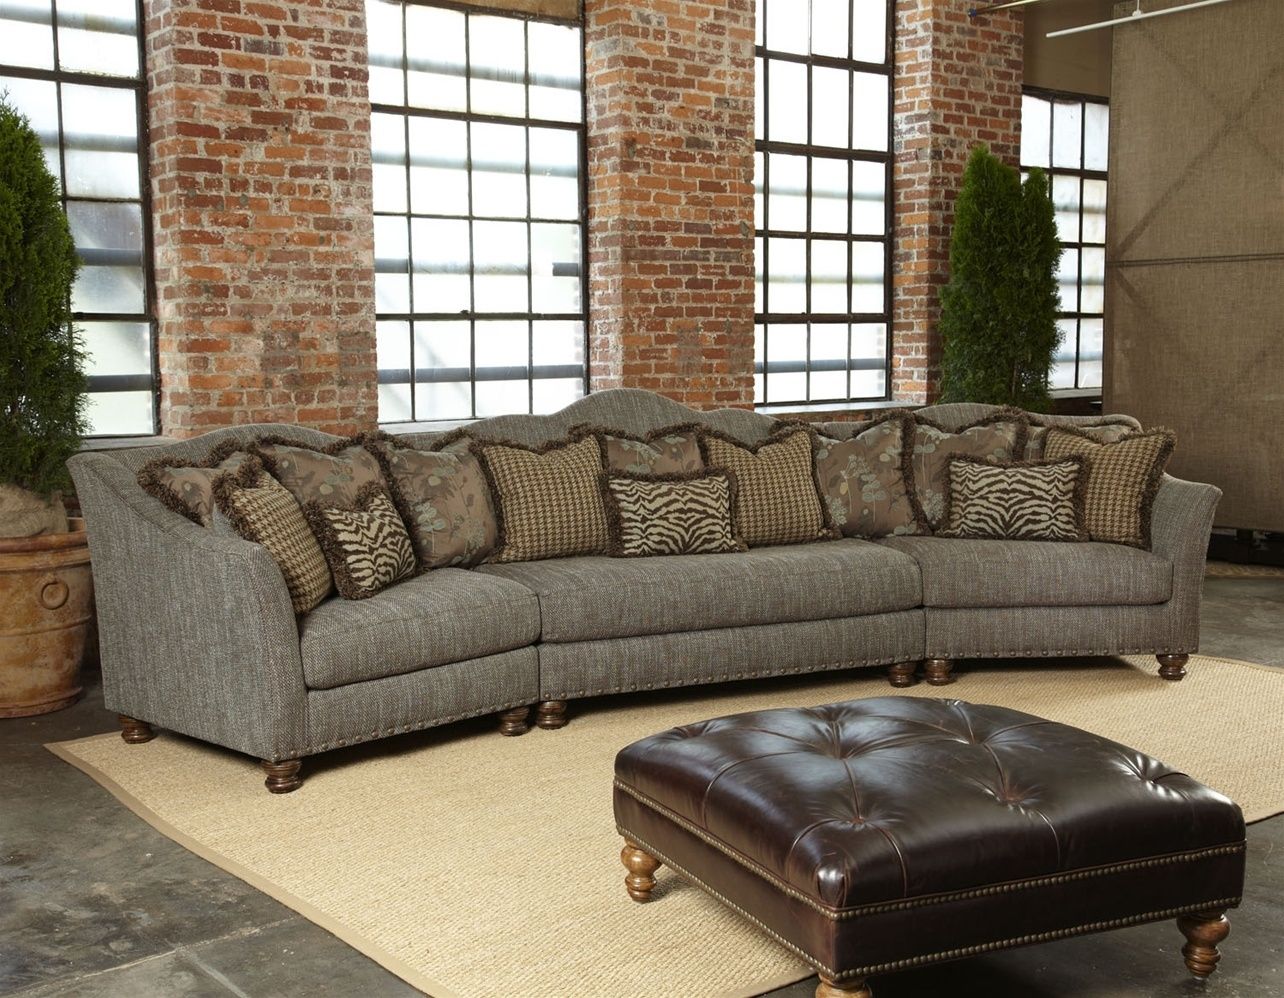 Good Quality Sectional Sofas – Cleanupflorida With Regard To Good Quality Sectional Sofas (View 3 of 10)